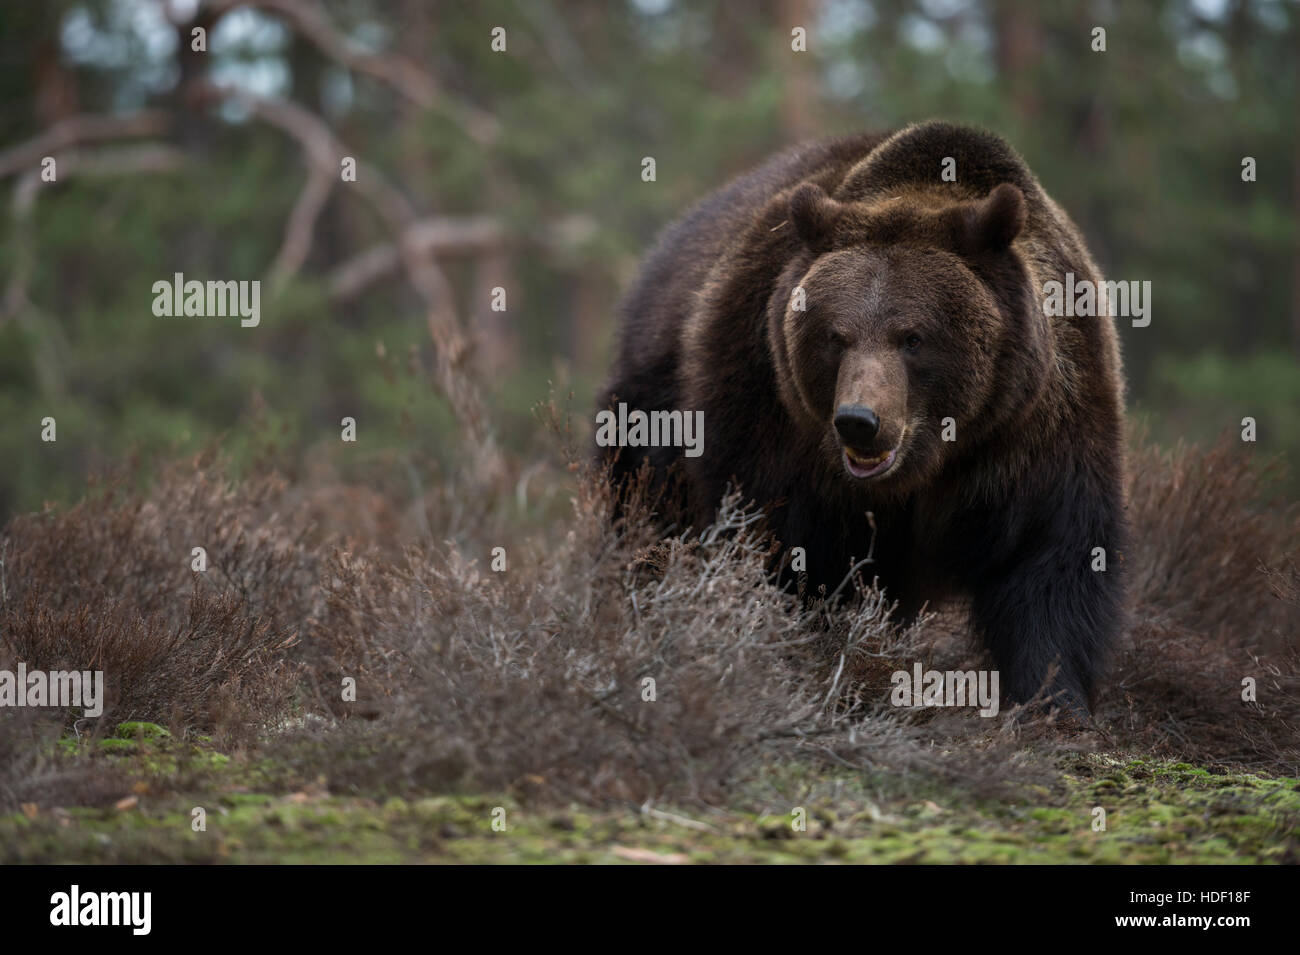 European Brown Bear ( Ursus arctos ) standing in the undergrowth at the edge of a forest, dangerous encounter. Stock Photo